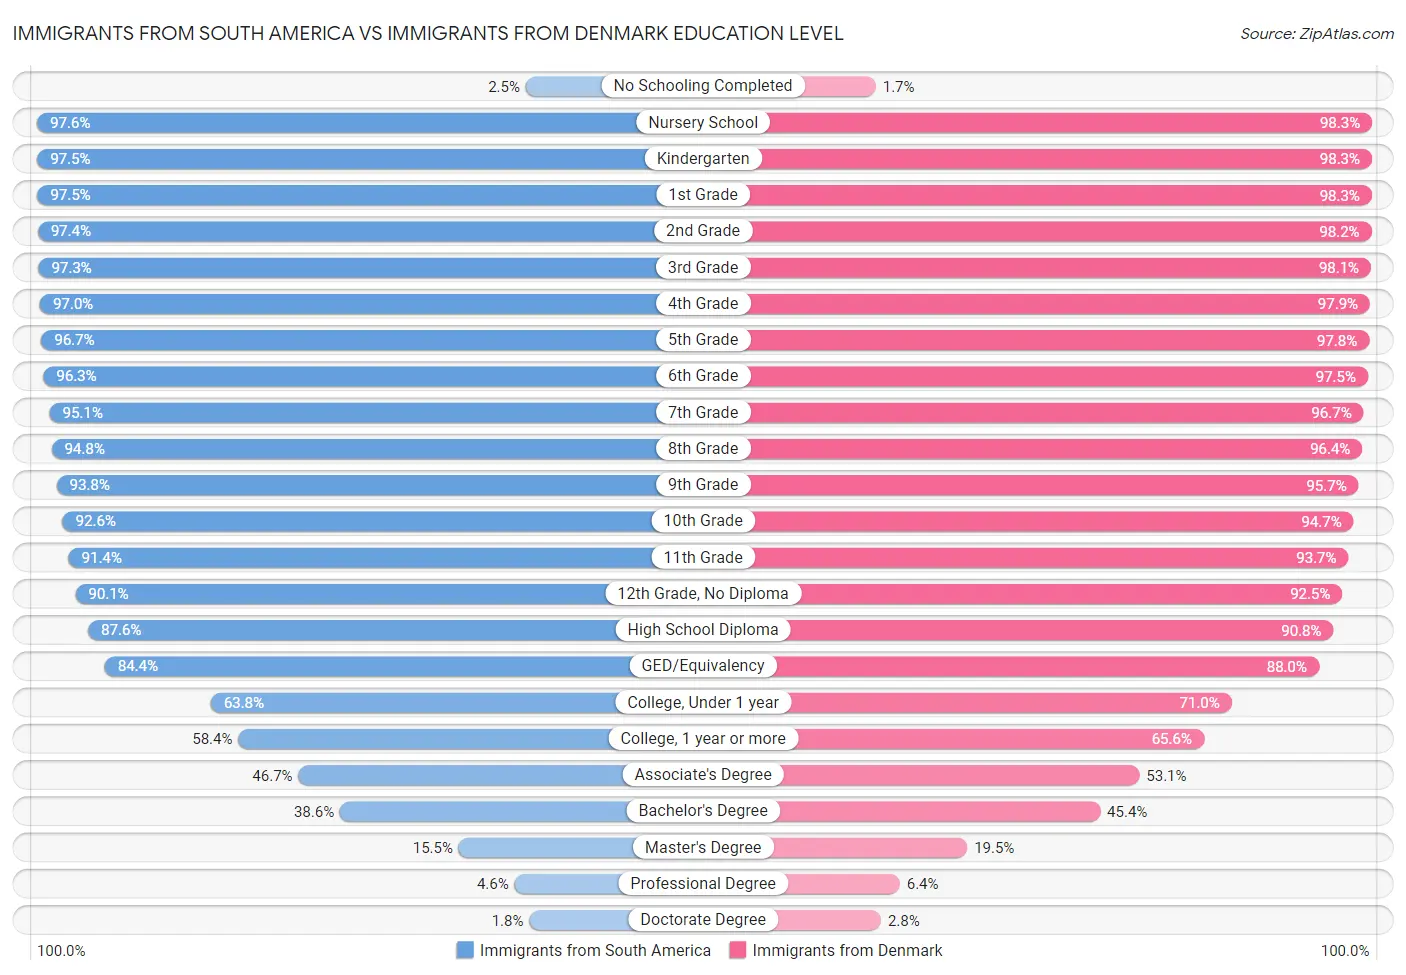 Immigrants from South America vs Immigrants from Denmark Education Level